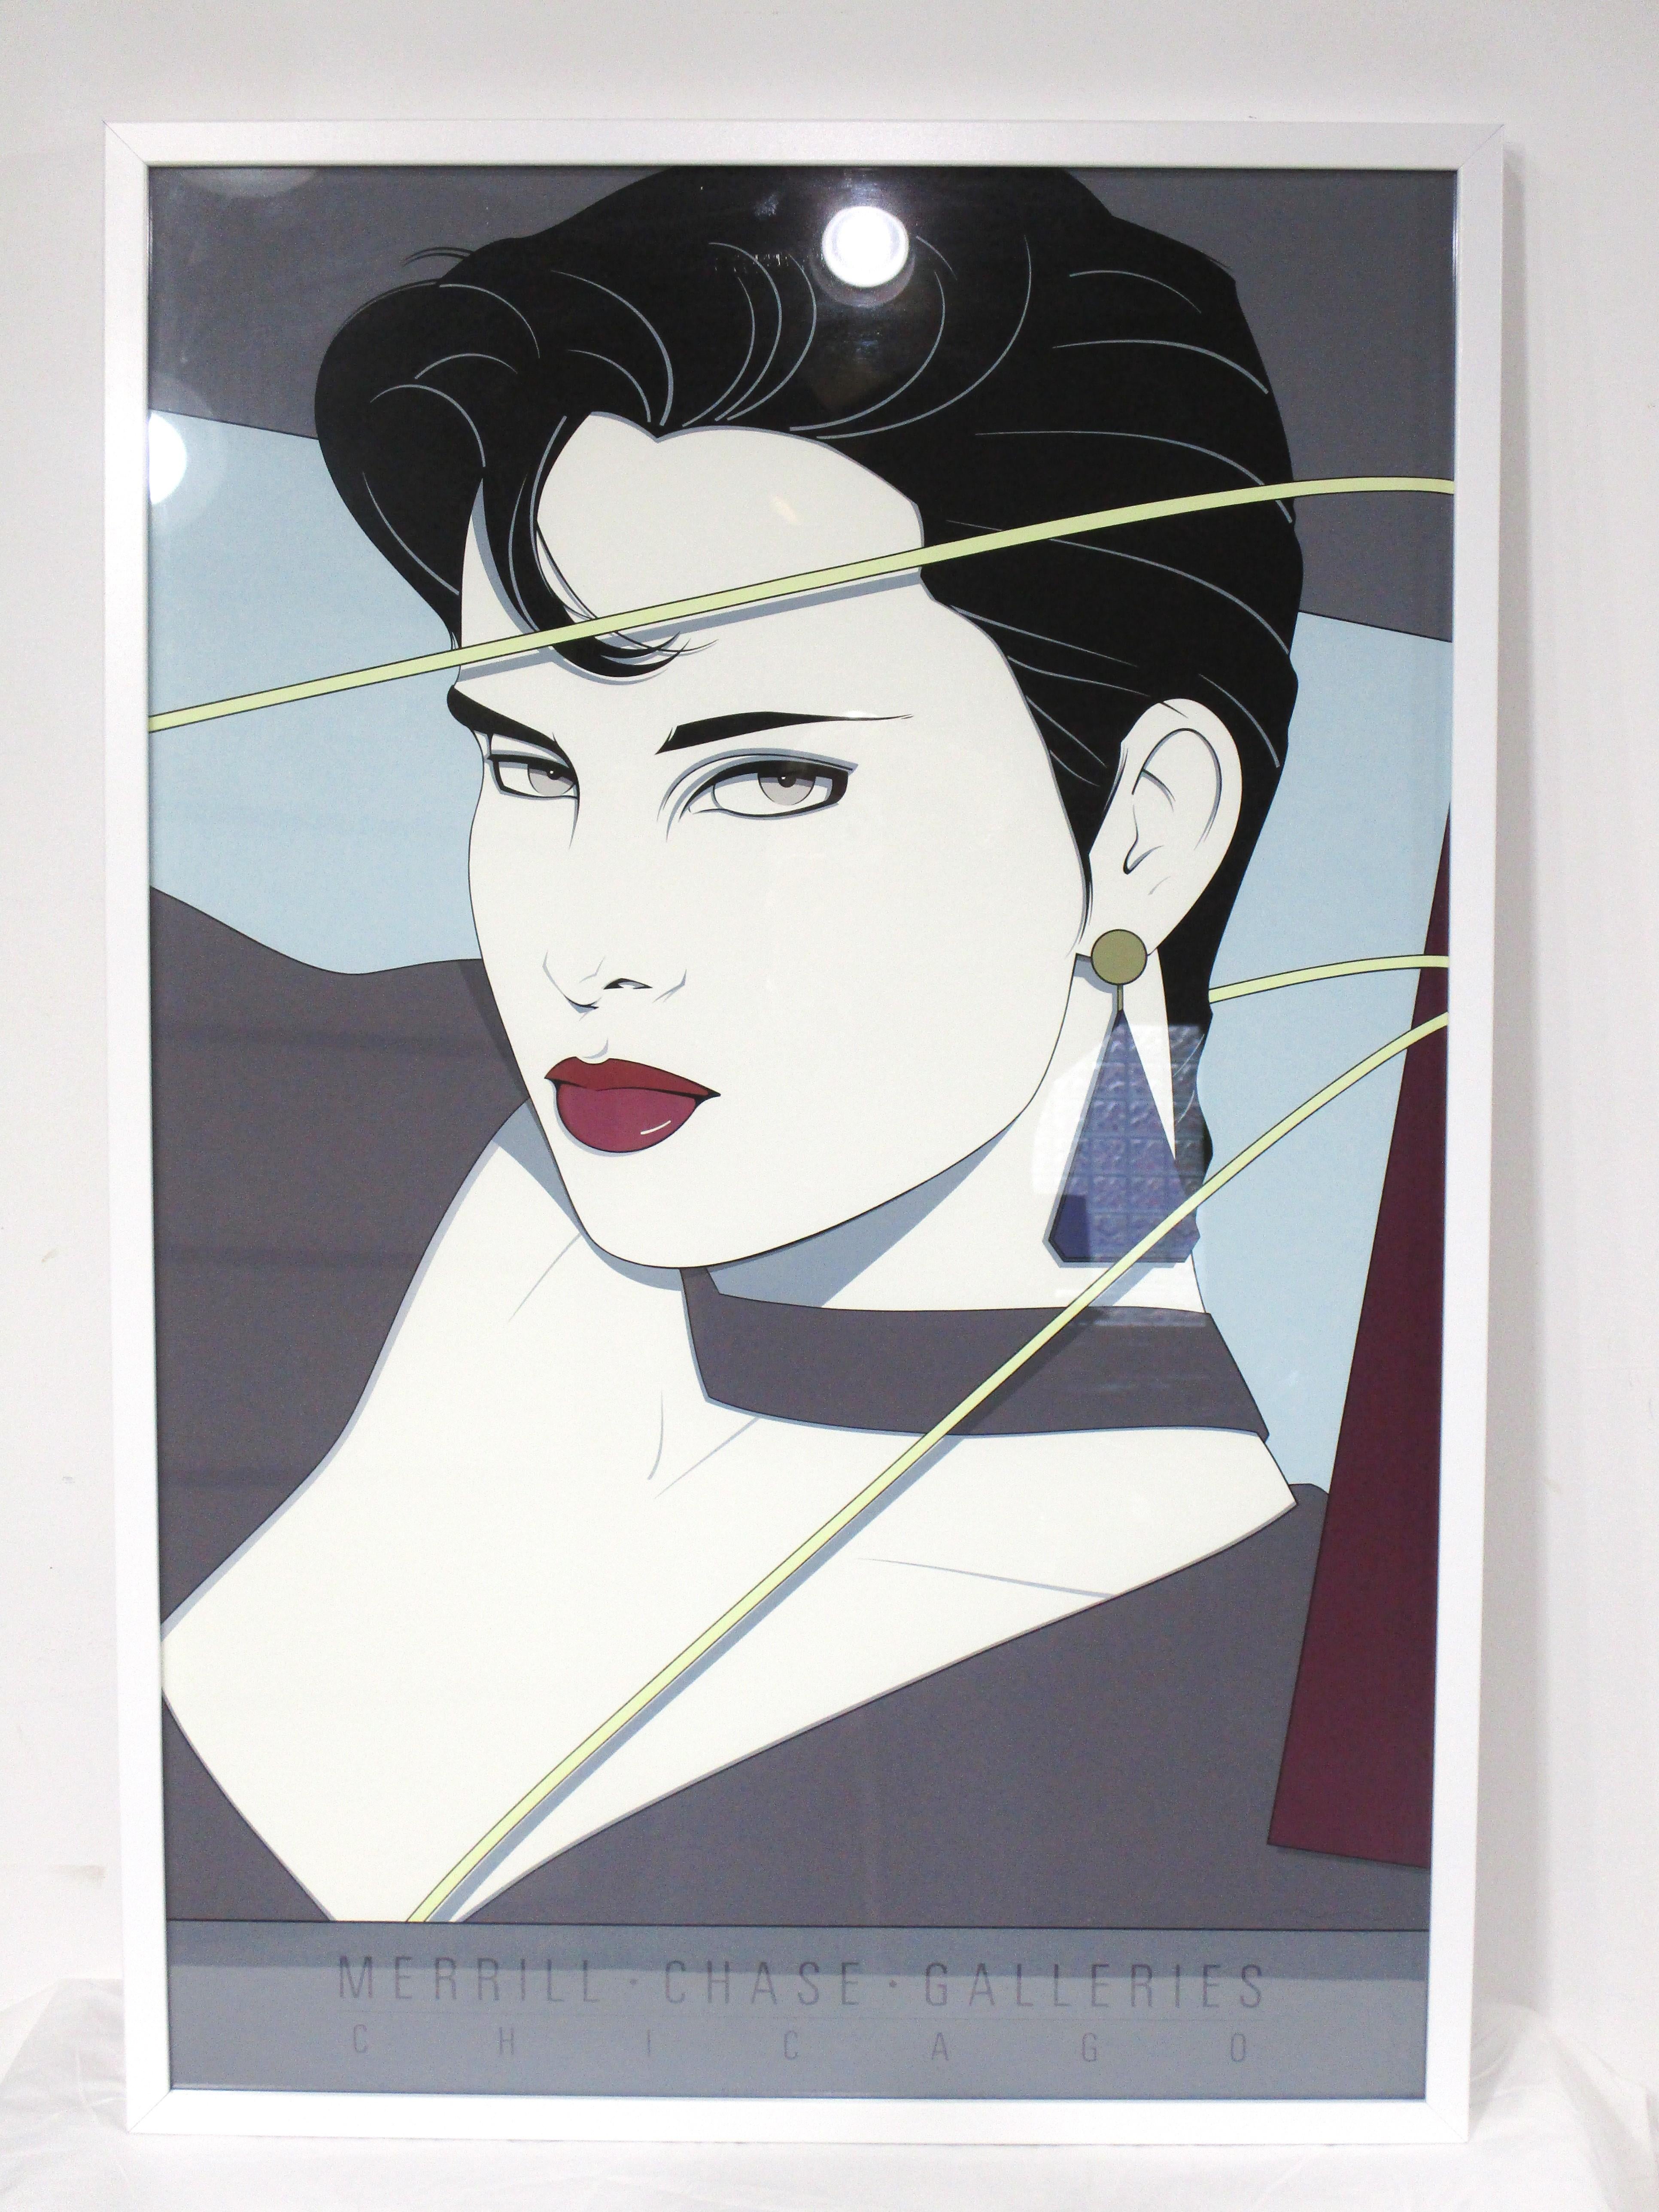 A 1980's stylized framed art gallery poster of a sexy women from that iconic era of disco , Wham and George Michael when life was happening during that period . This highest quality silkscreen print was published by Mirage Editions with the majority